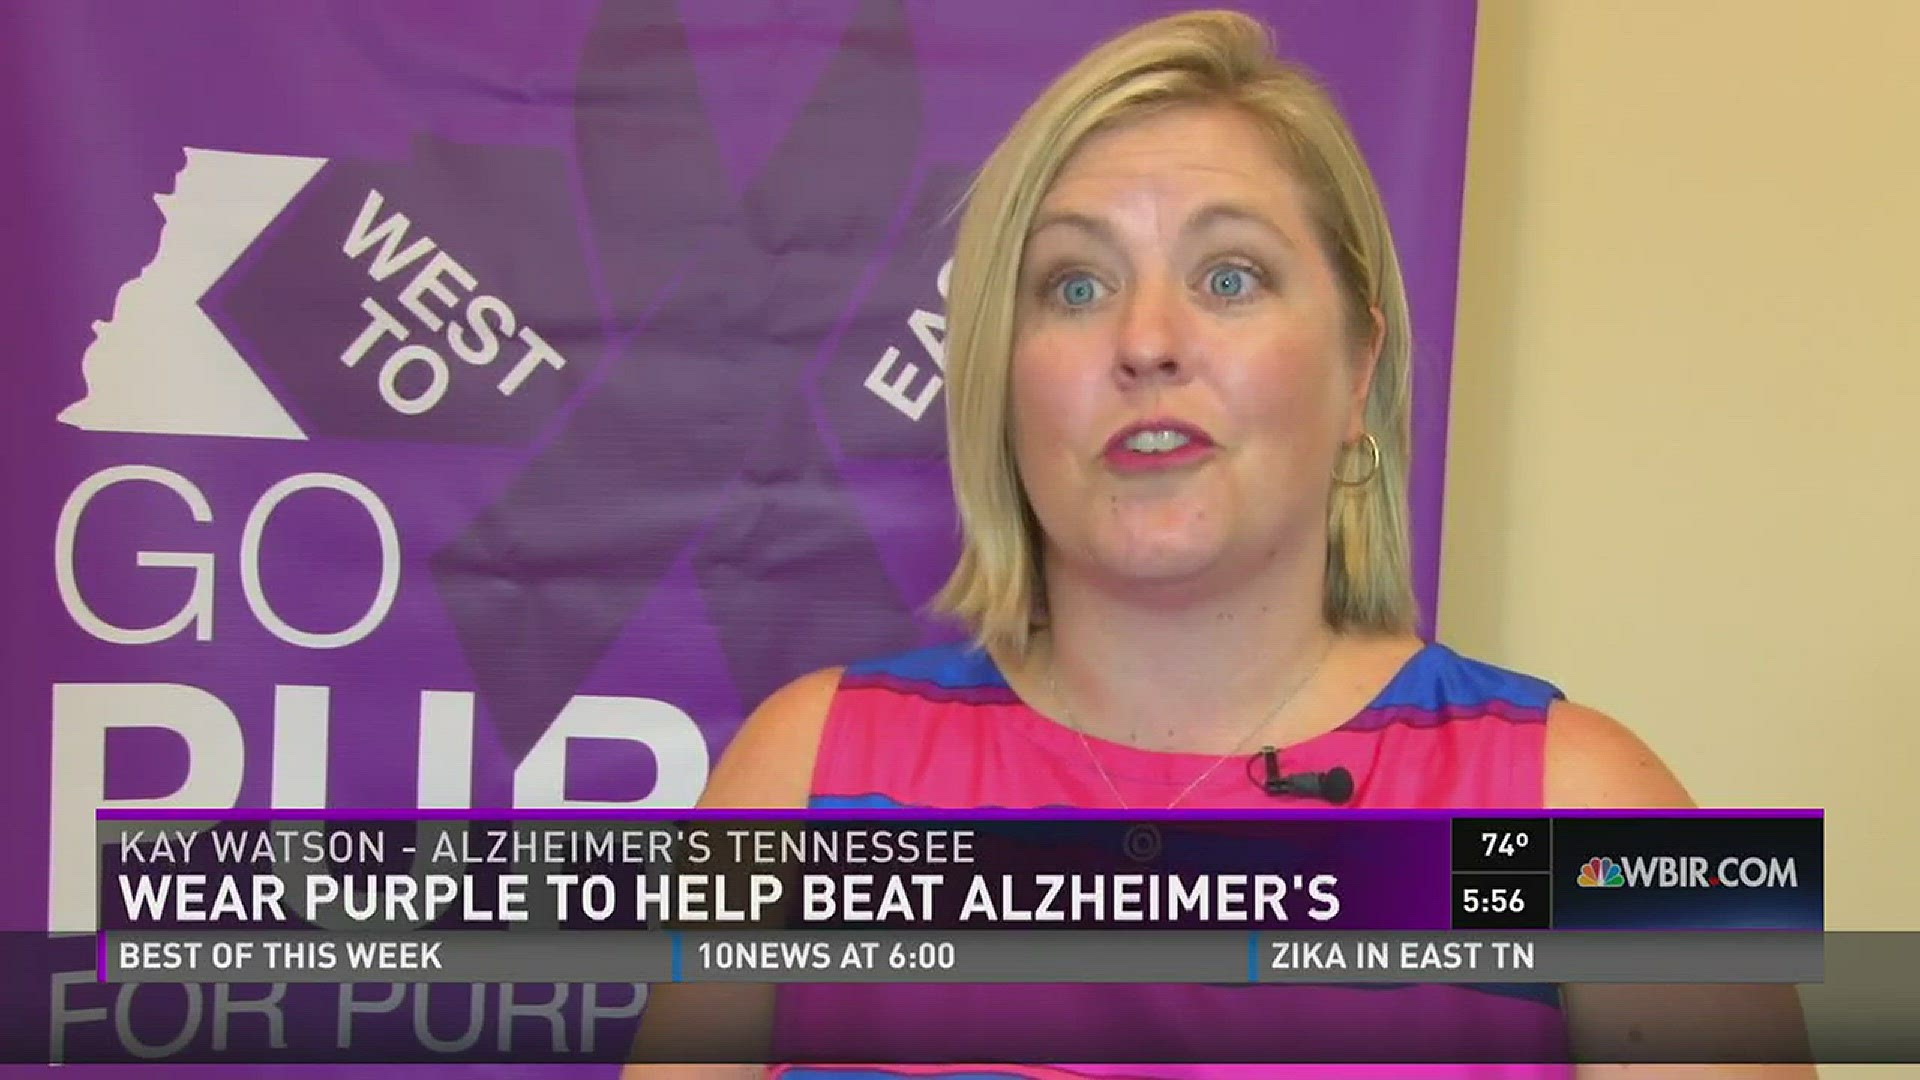 People on Friday were encouraged to wear purple to raise awareness about Alzheimer's and the importance of research to combat it. July 29, 2016